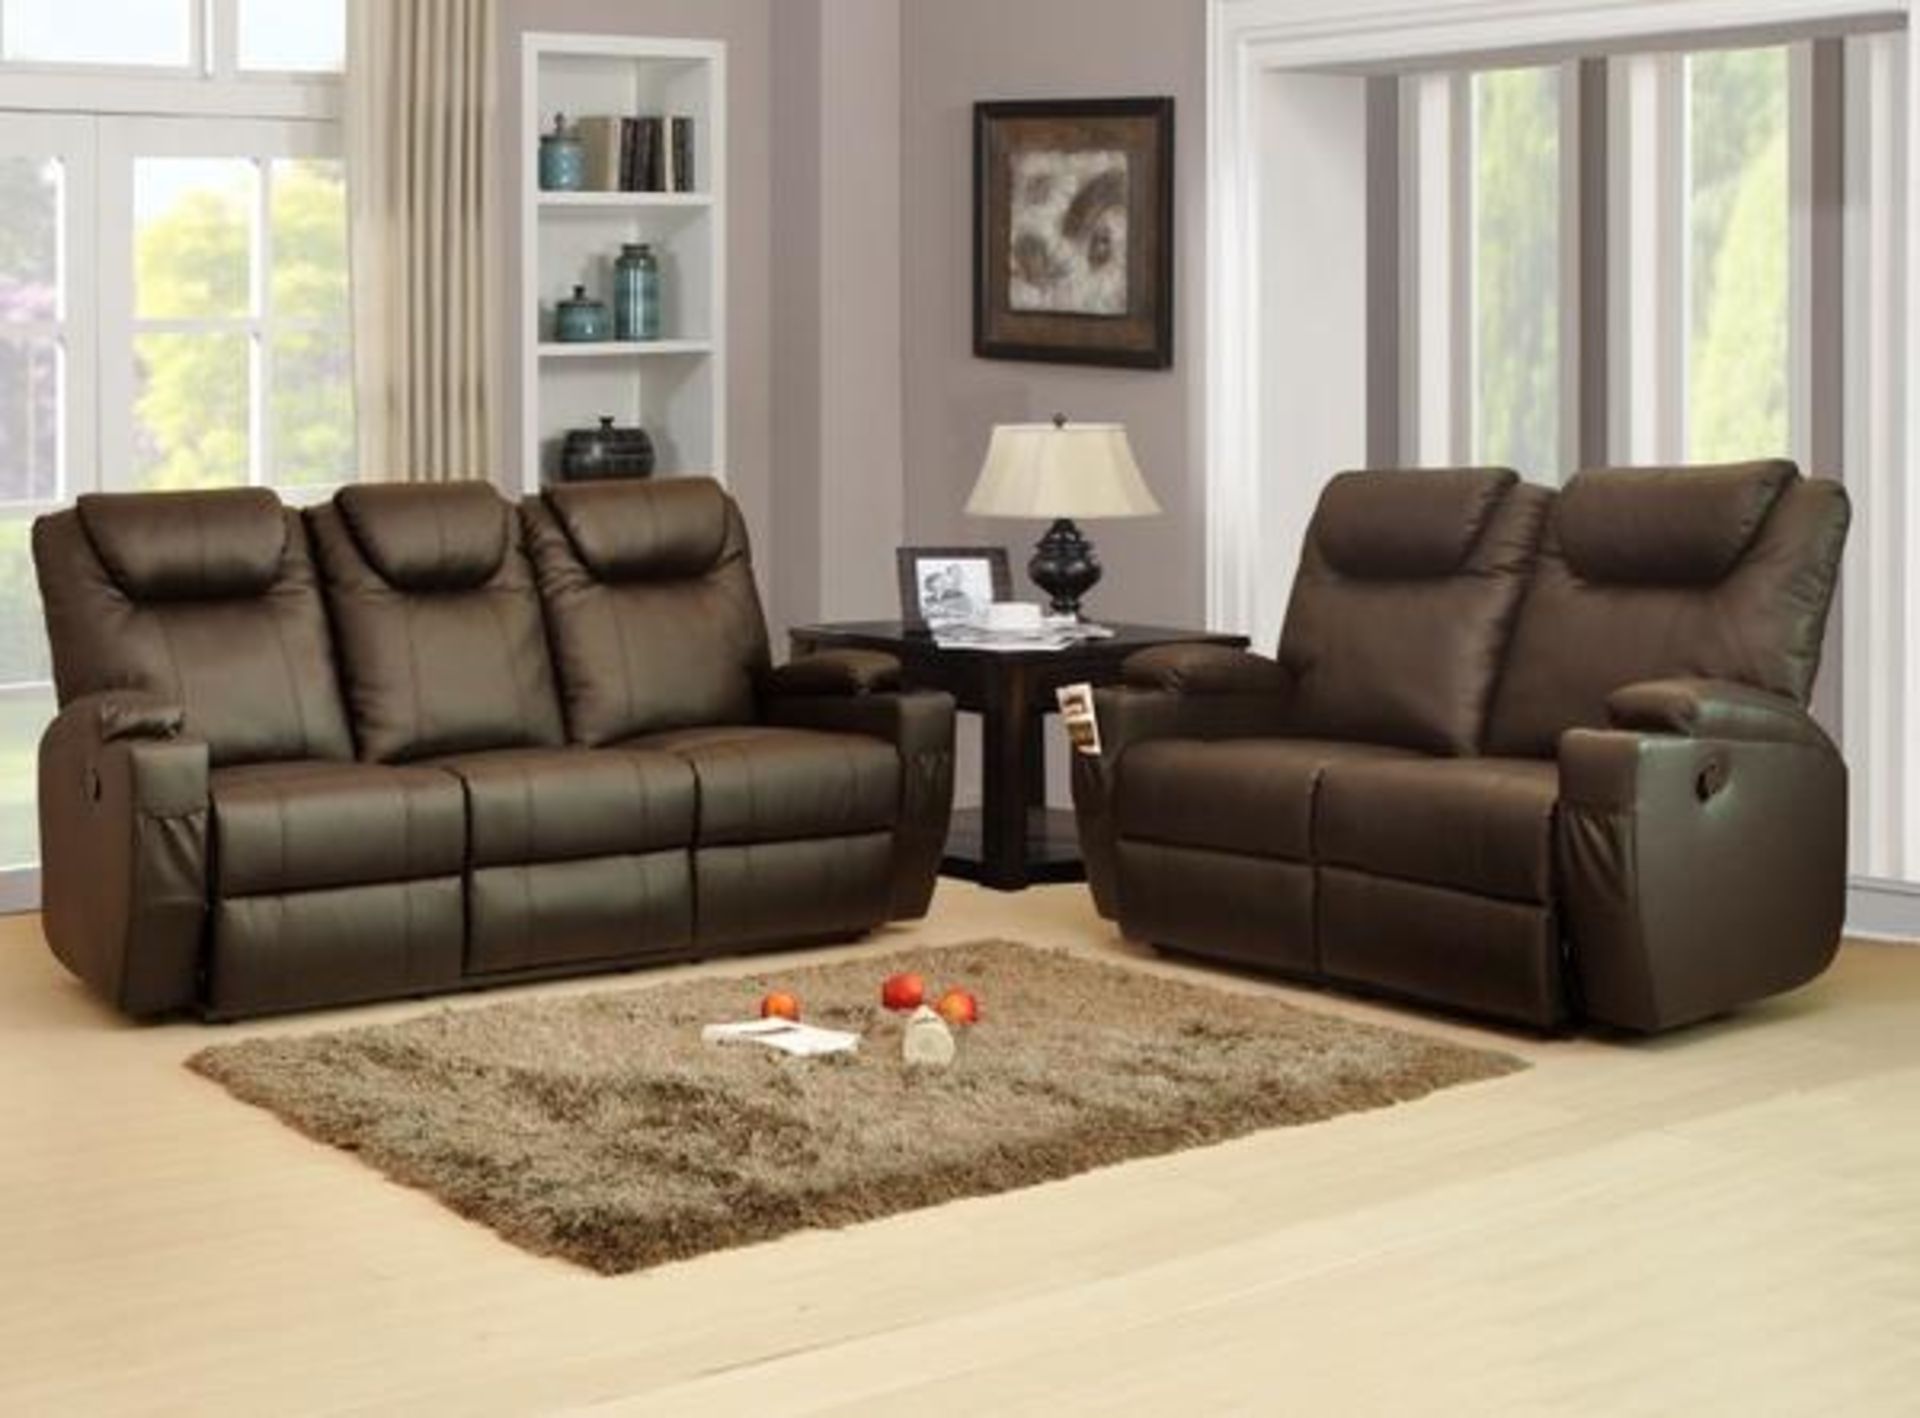 Brand New Boxed 3 Seater Plus 2 Seater Lazyboy Brown Leather Manual Reclining Sofas - Bild 2 aus 2